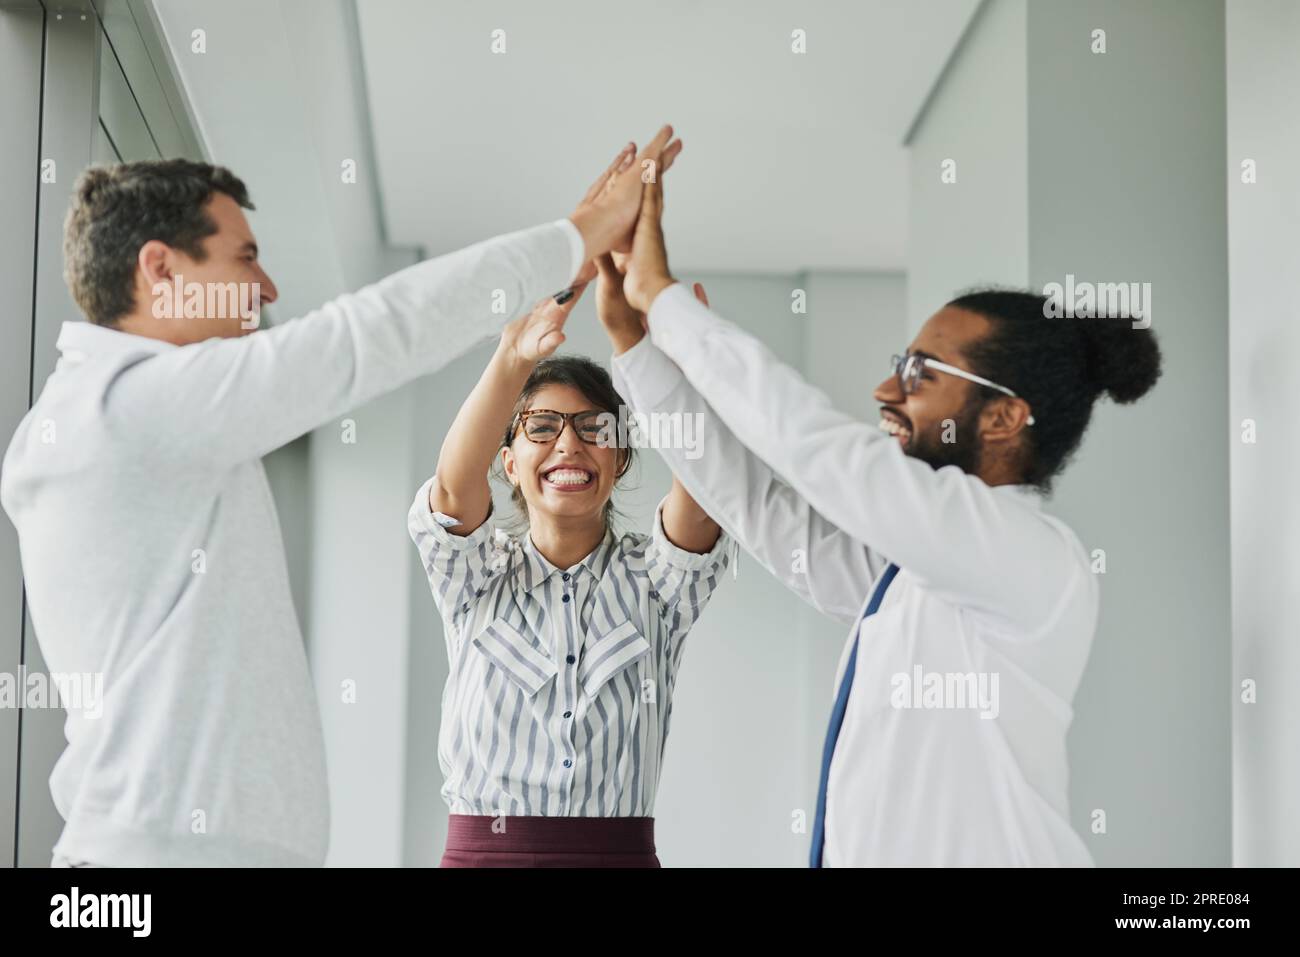 Uniting together in the name of success. a group of businesspeople high fiving together in an office. Stock Photo